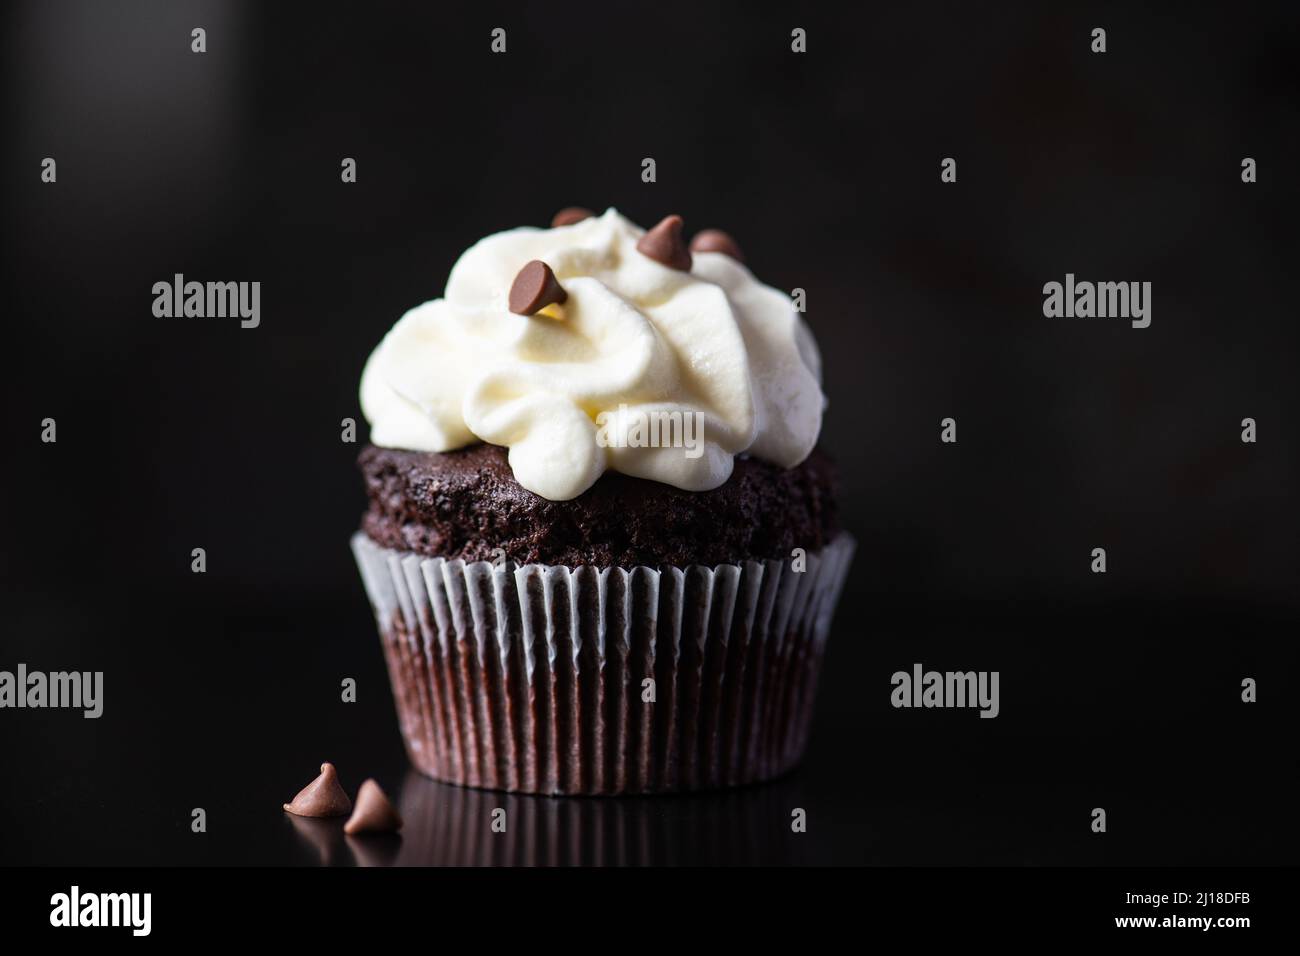 One chocolate cupcake with whipped cream frosting and chocolate chips. Stock Photo